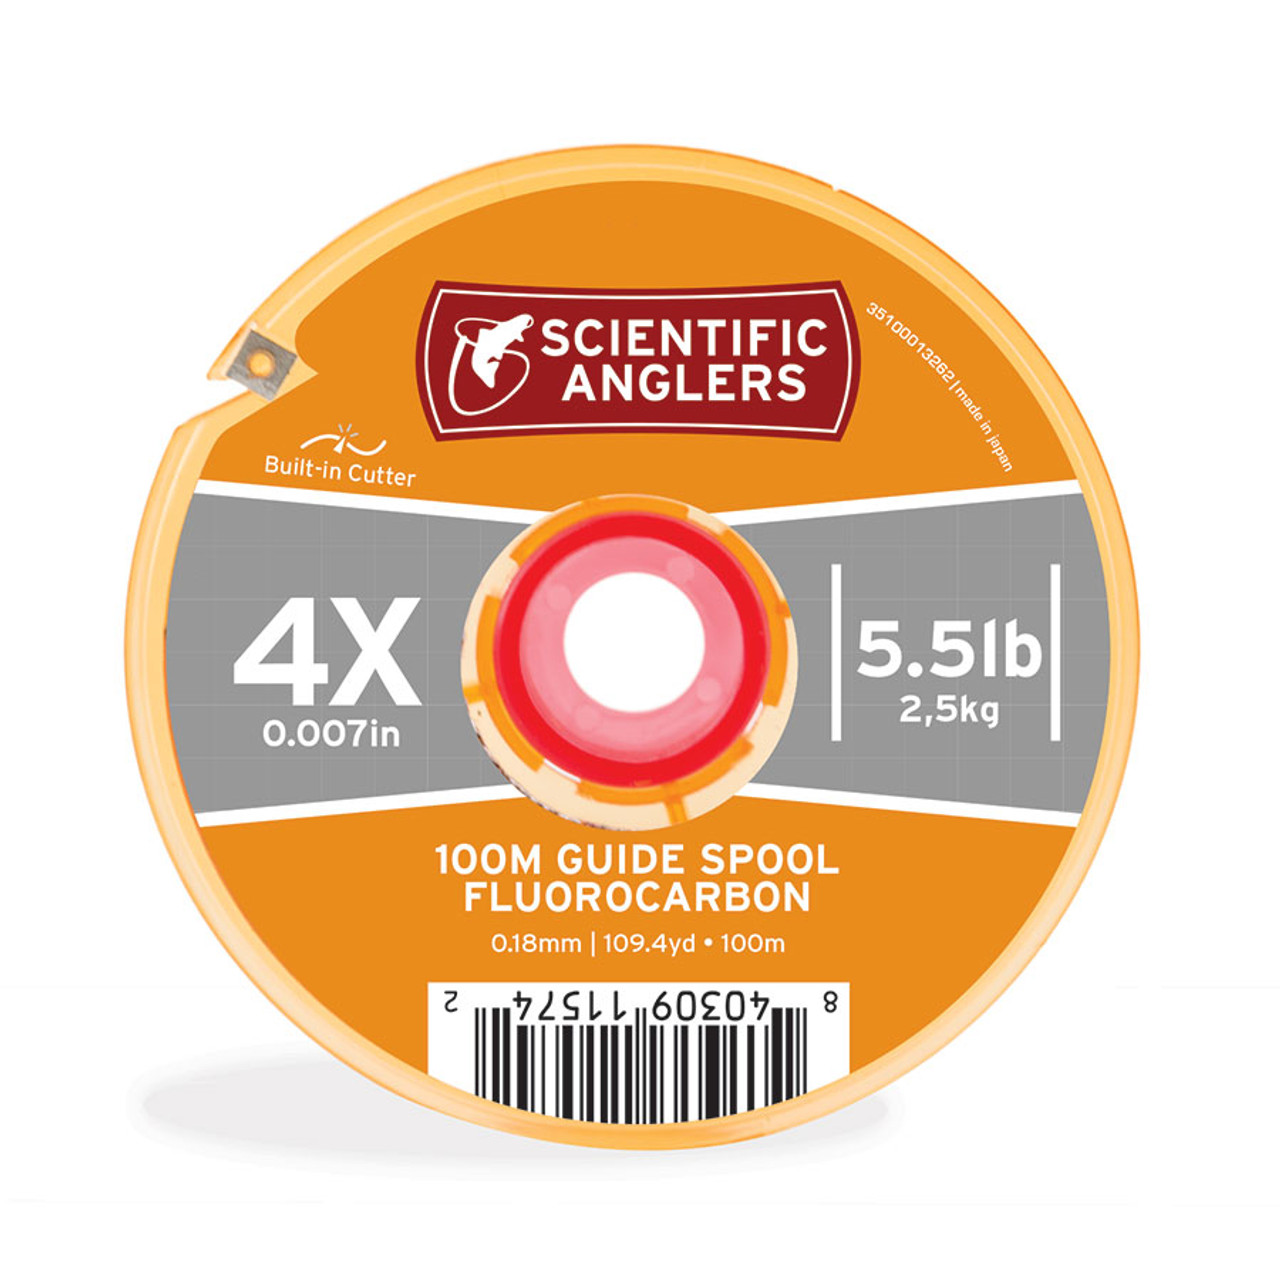 Scientific Anglers Fluorocarbon Tippet 100m Guide Spool 1x